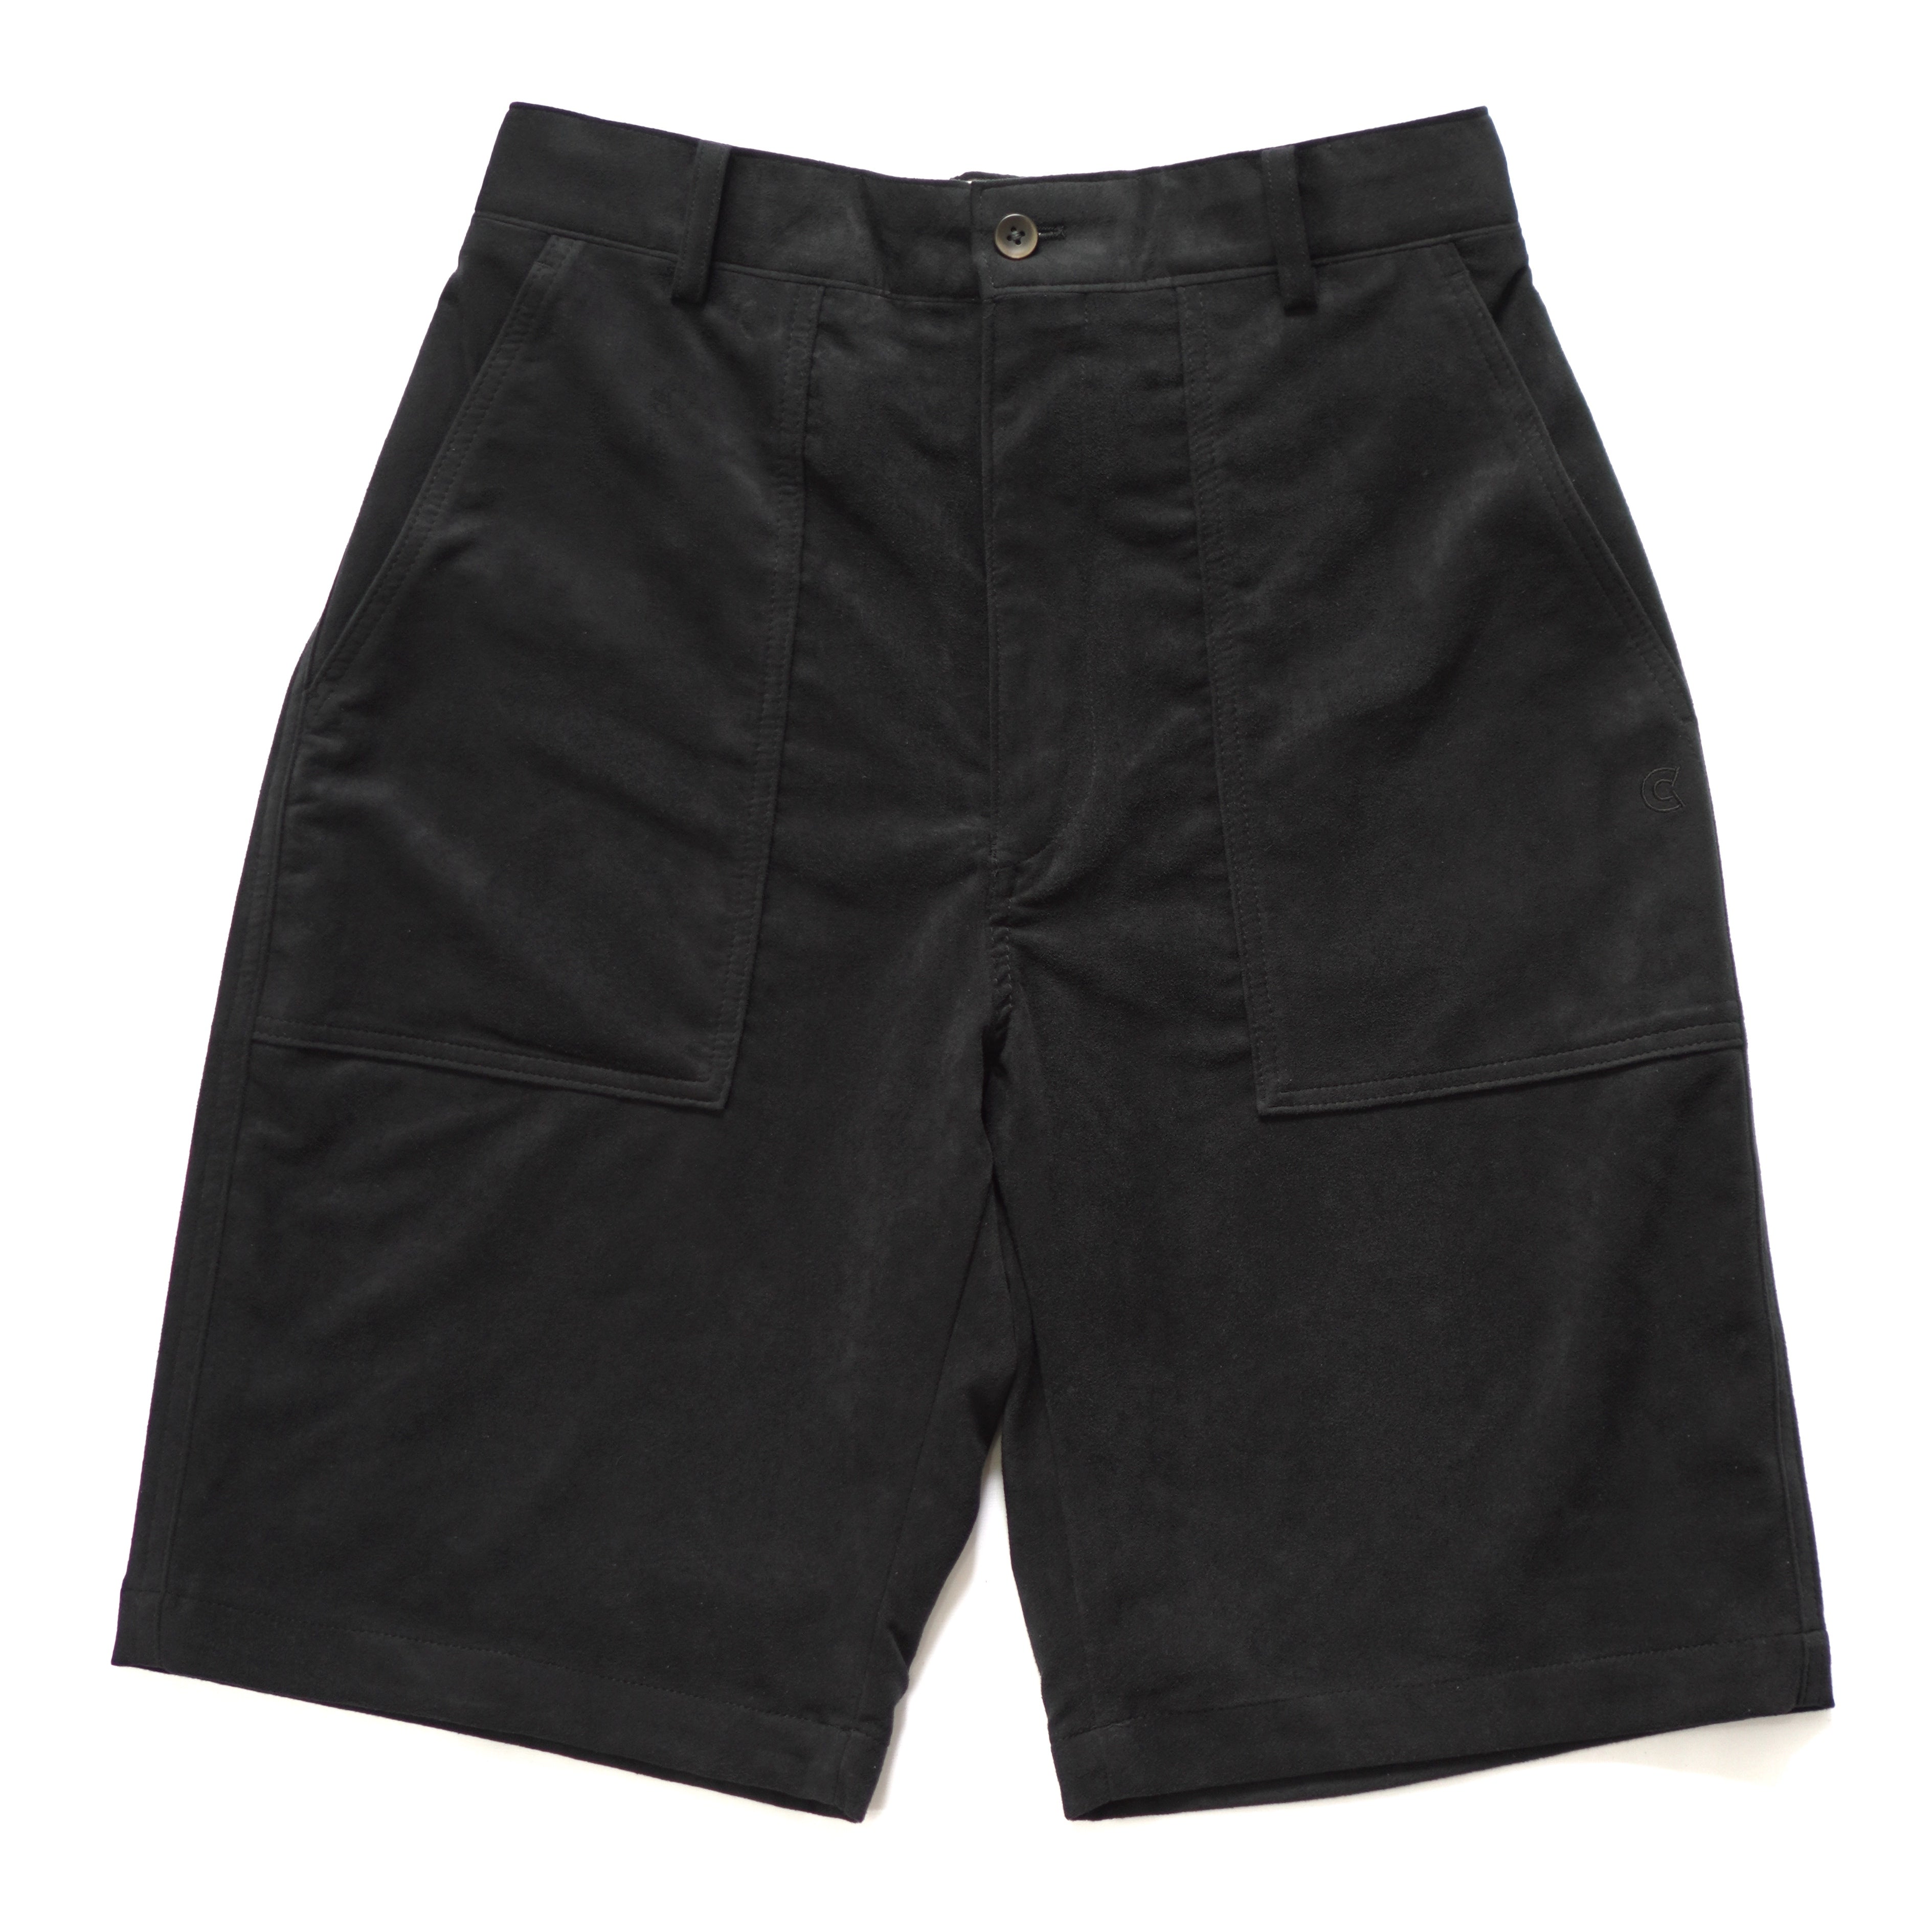 COLONY CLOTHING / EXPEDITION SHORT  / CC20-PT01